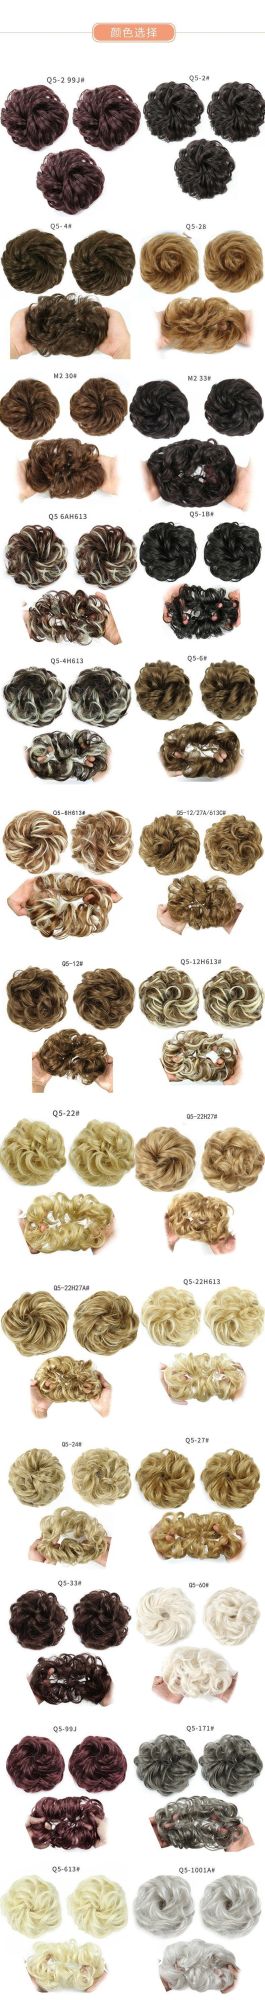 Wholesale Beautiful Ladies Different Natural Color Lace Front Wigs for Black Woman Use Hair